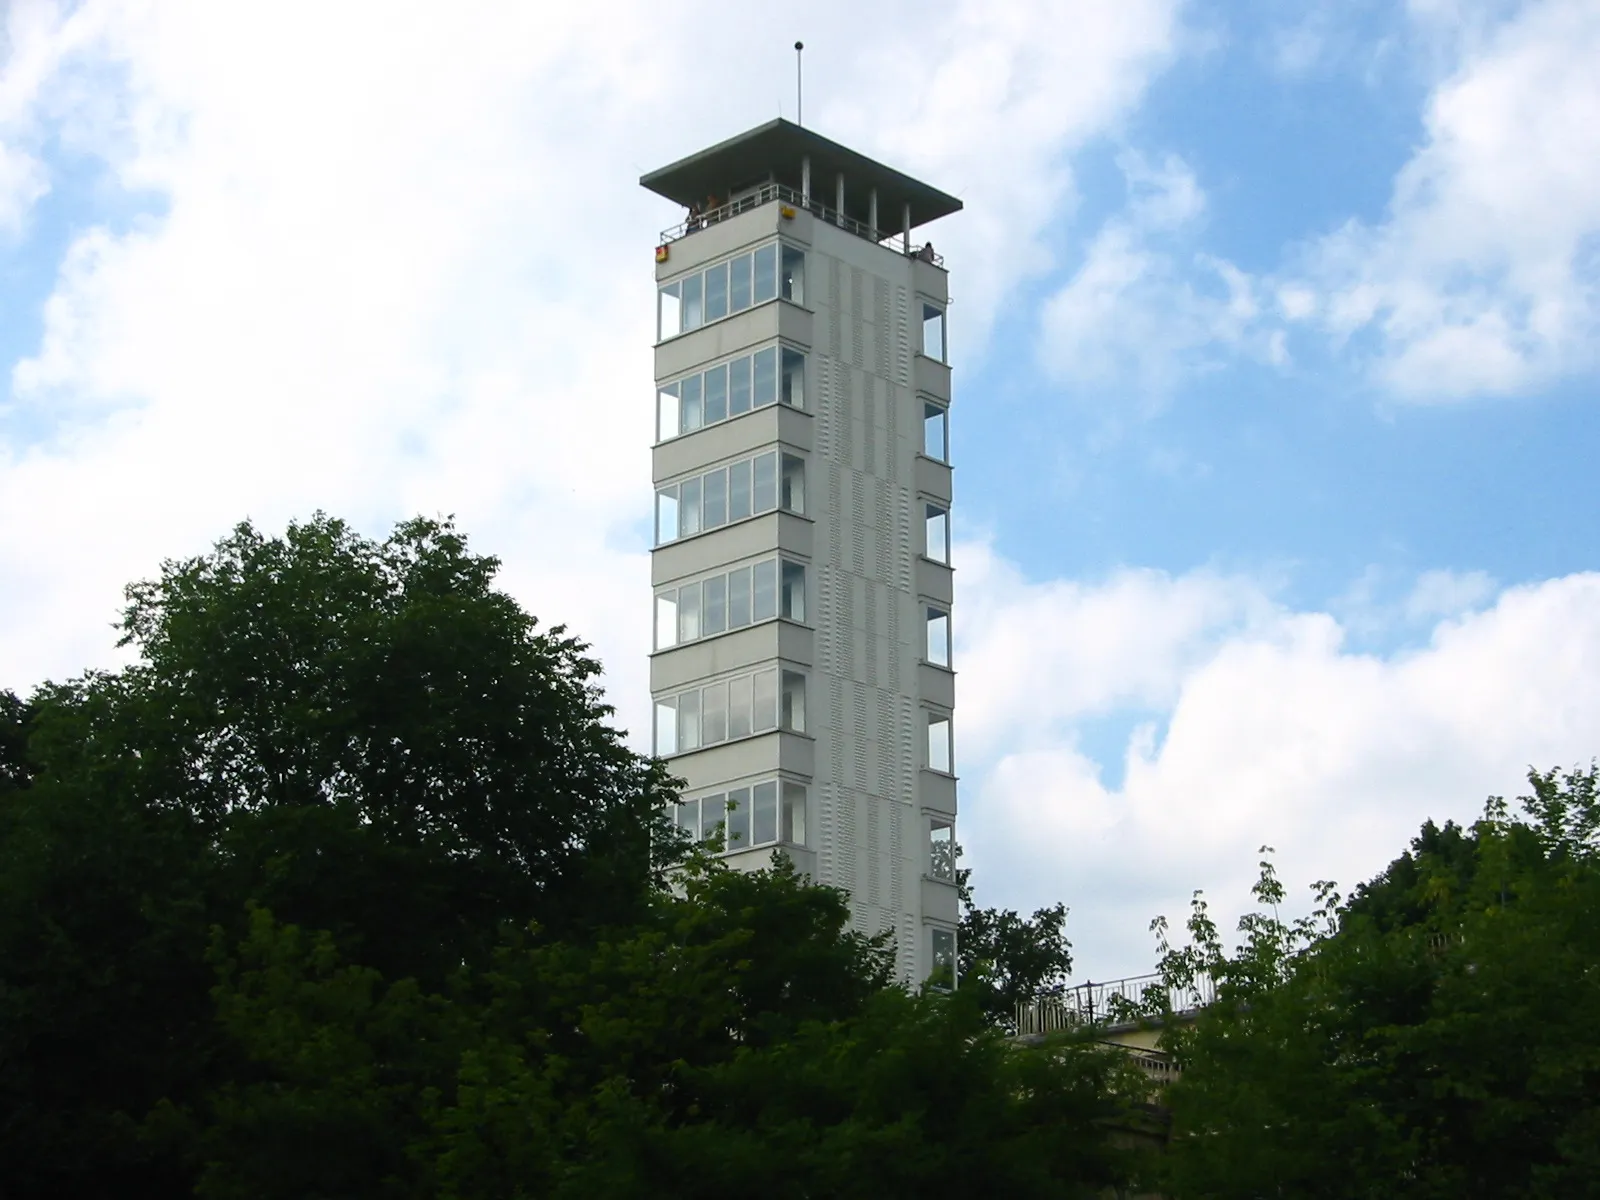 Photo showing: Berlin - Müggelturm - view from forecourt